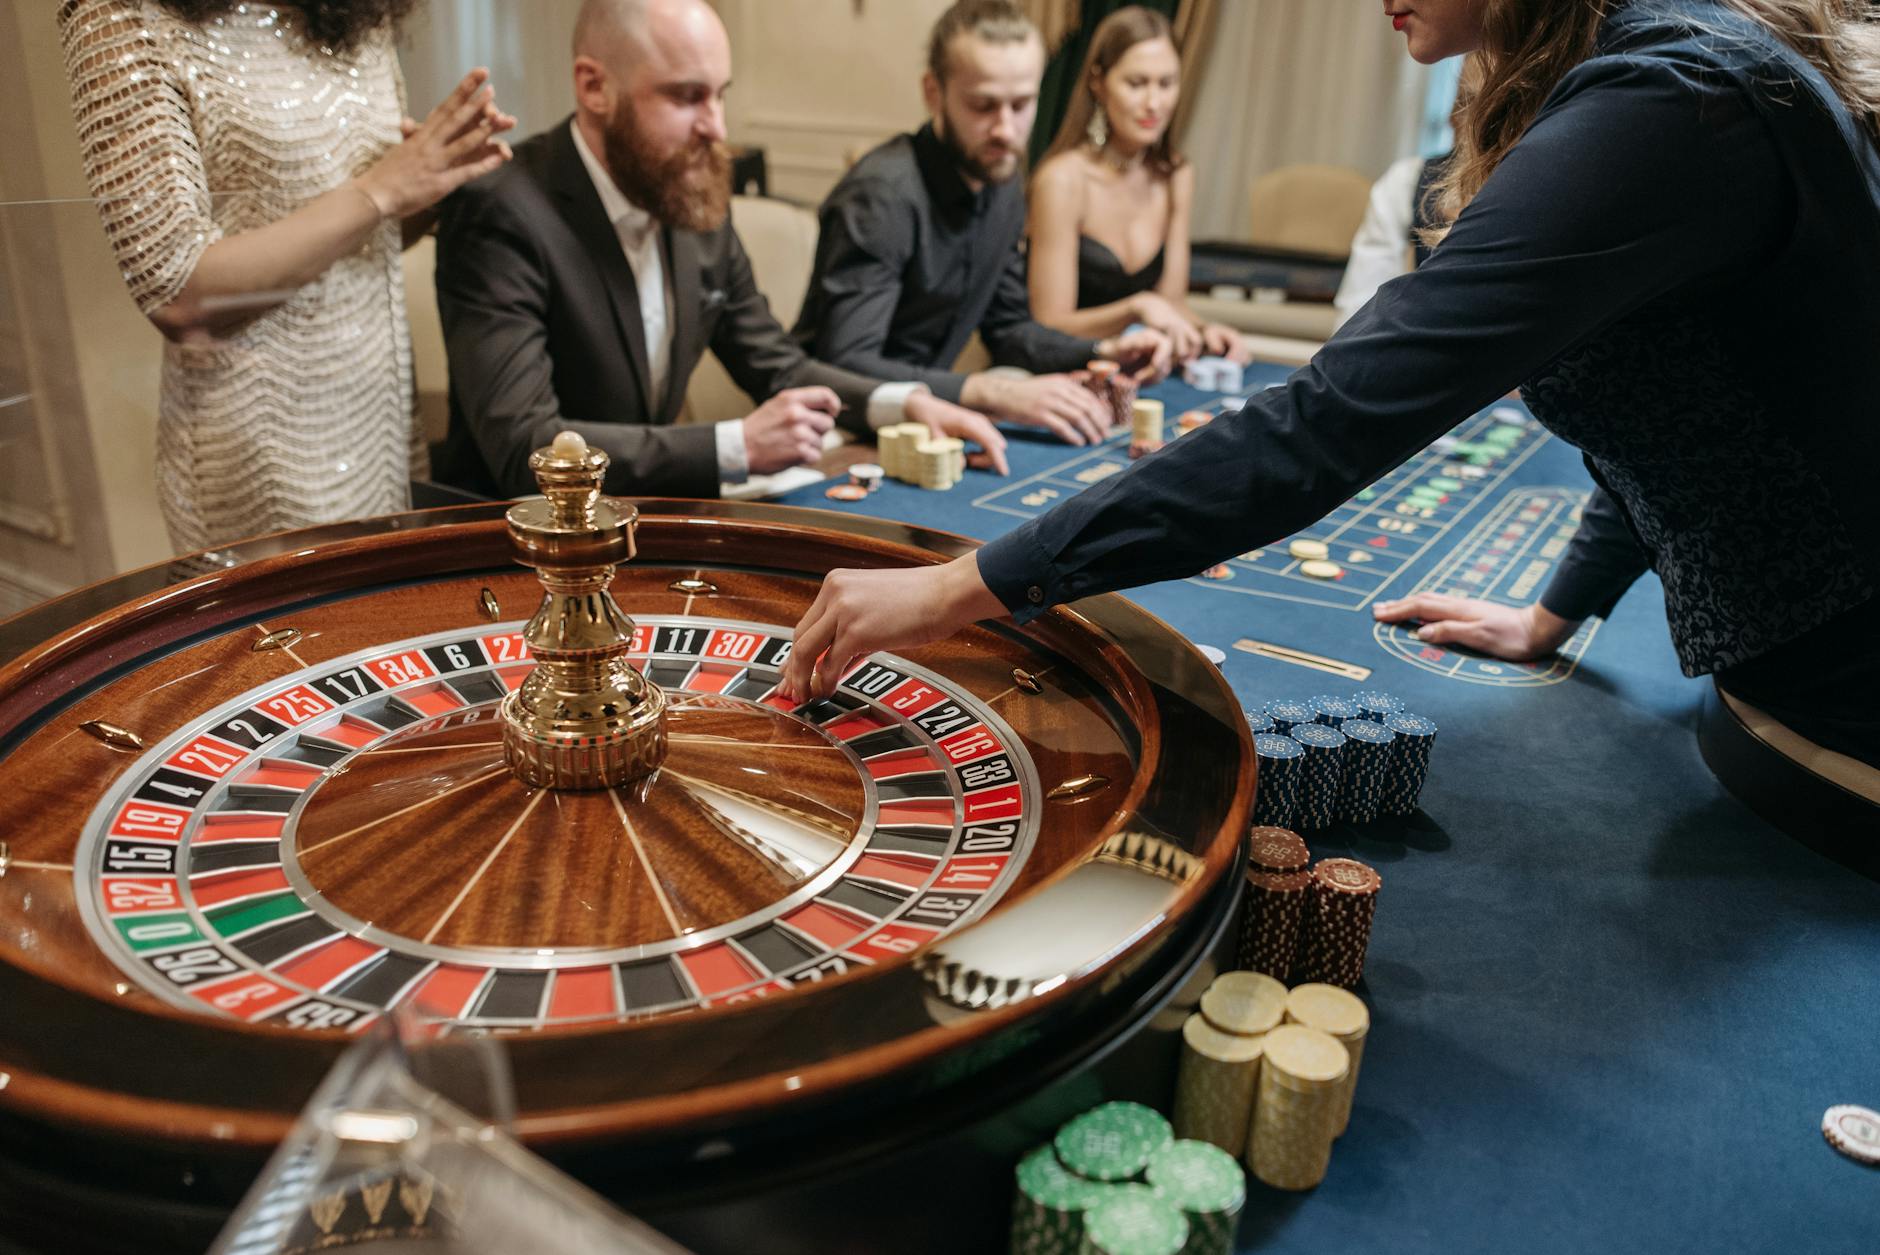 A Croupier Spinning the Ball in the Roulette Wheel